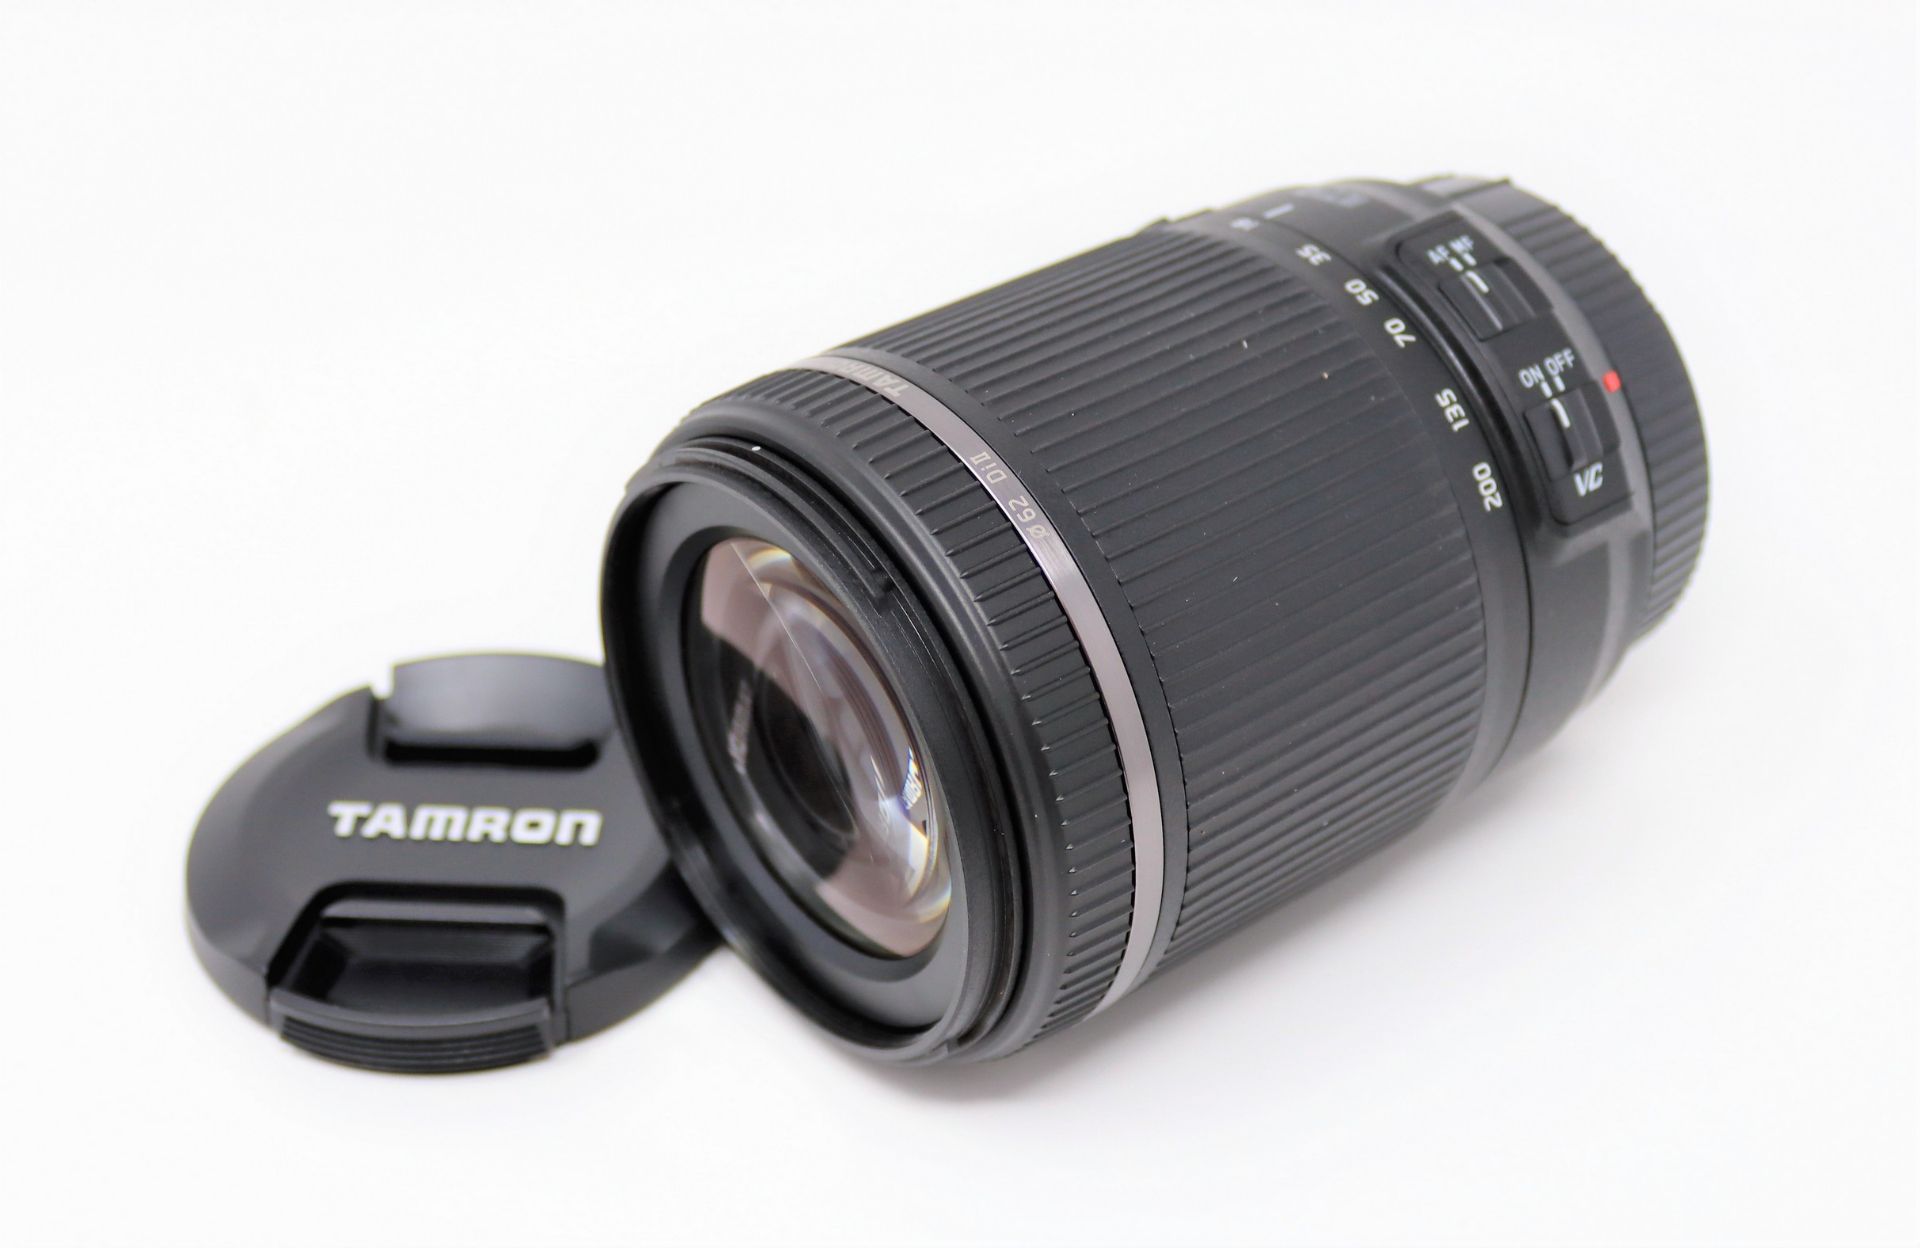 A boxed as new Tamron 18-200mm f/3.5-6.3 Di II VC Lens for Canon.